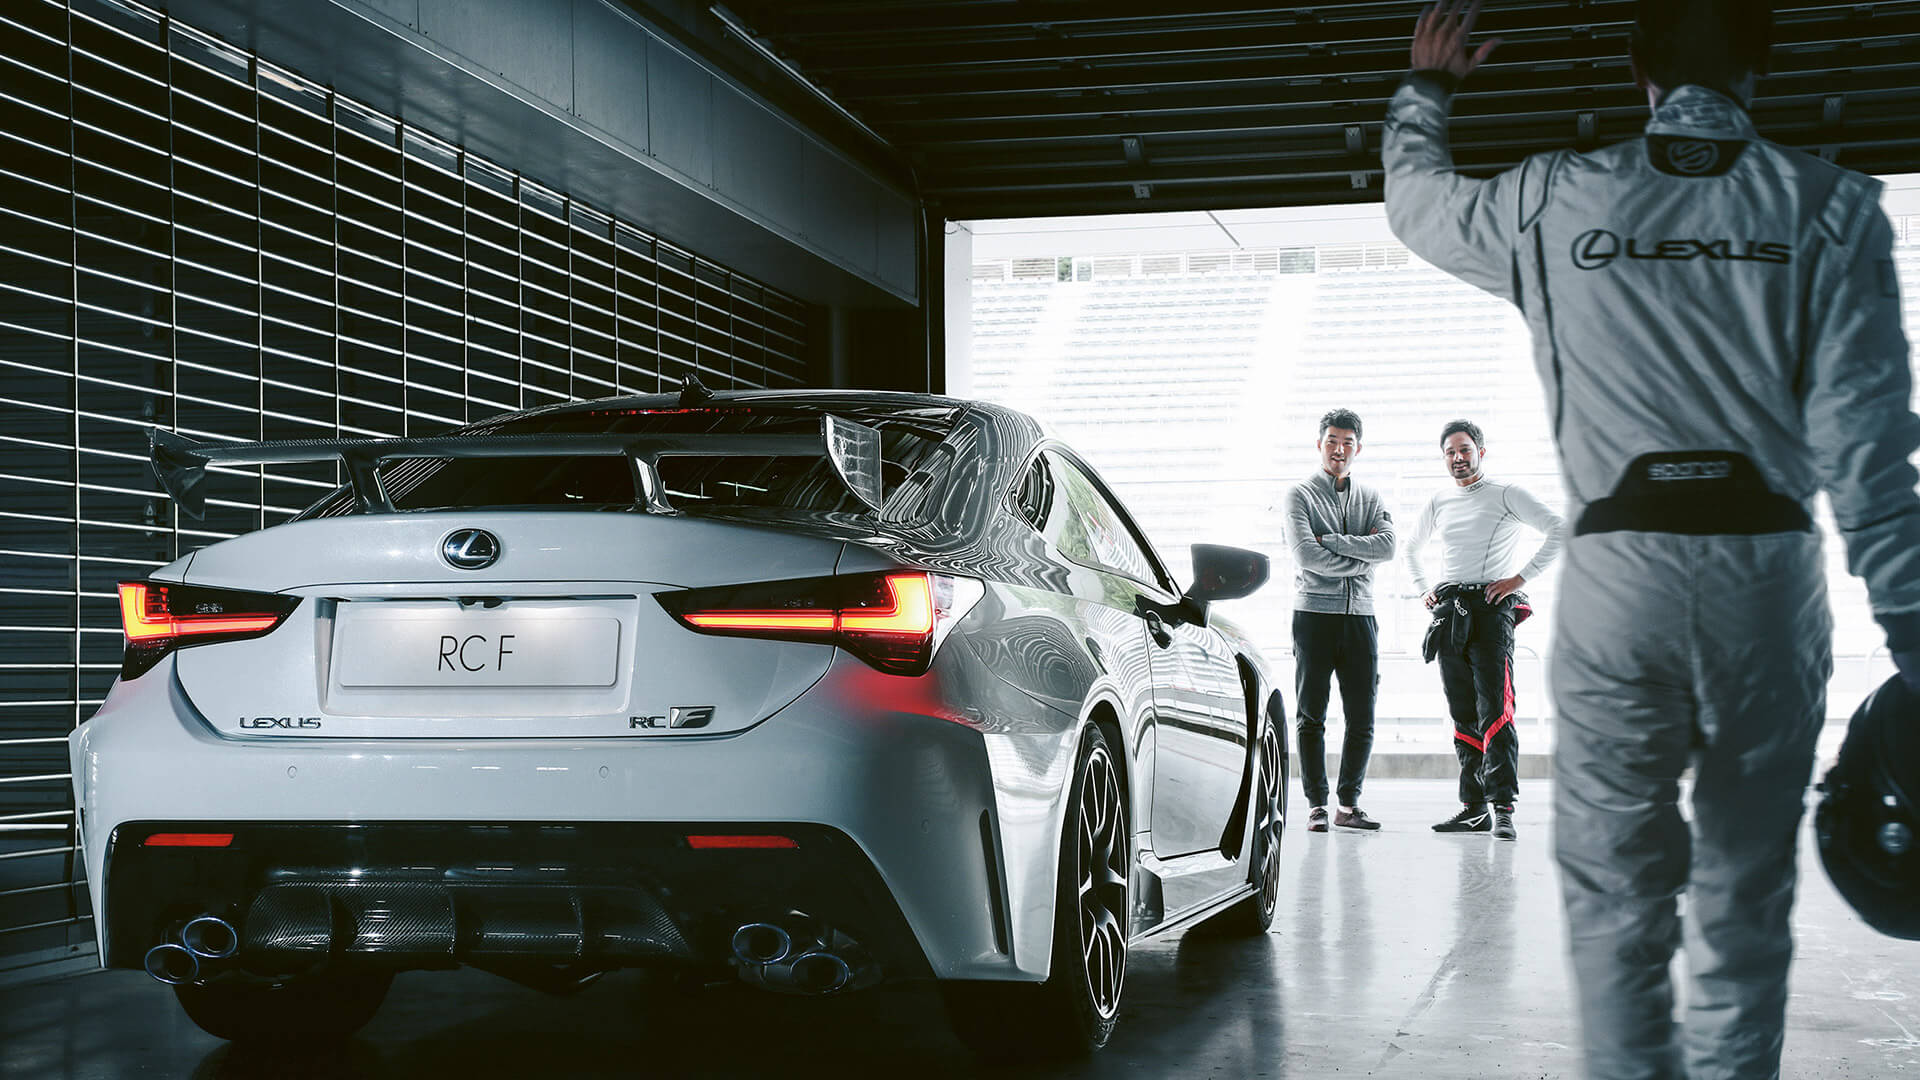 Lexus RC F parked in a race track garage 